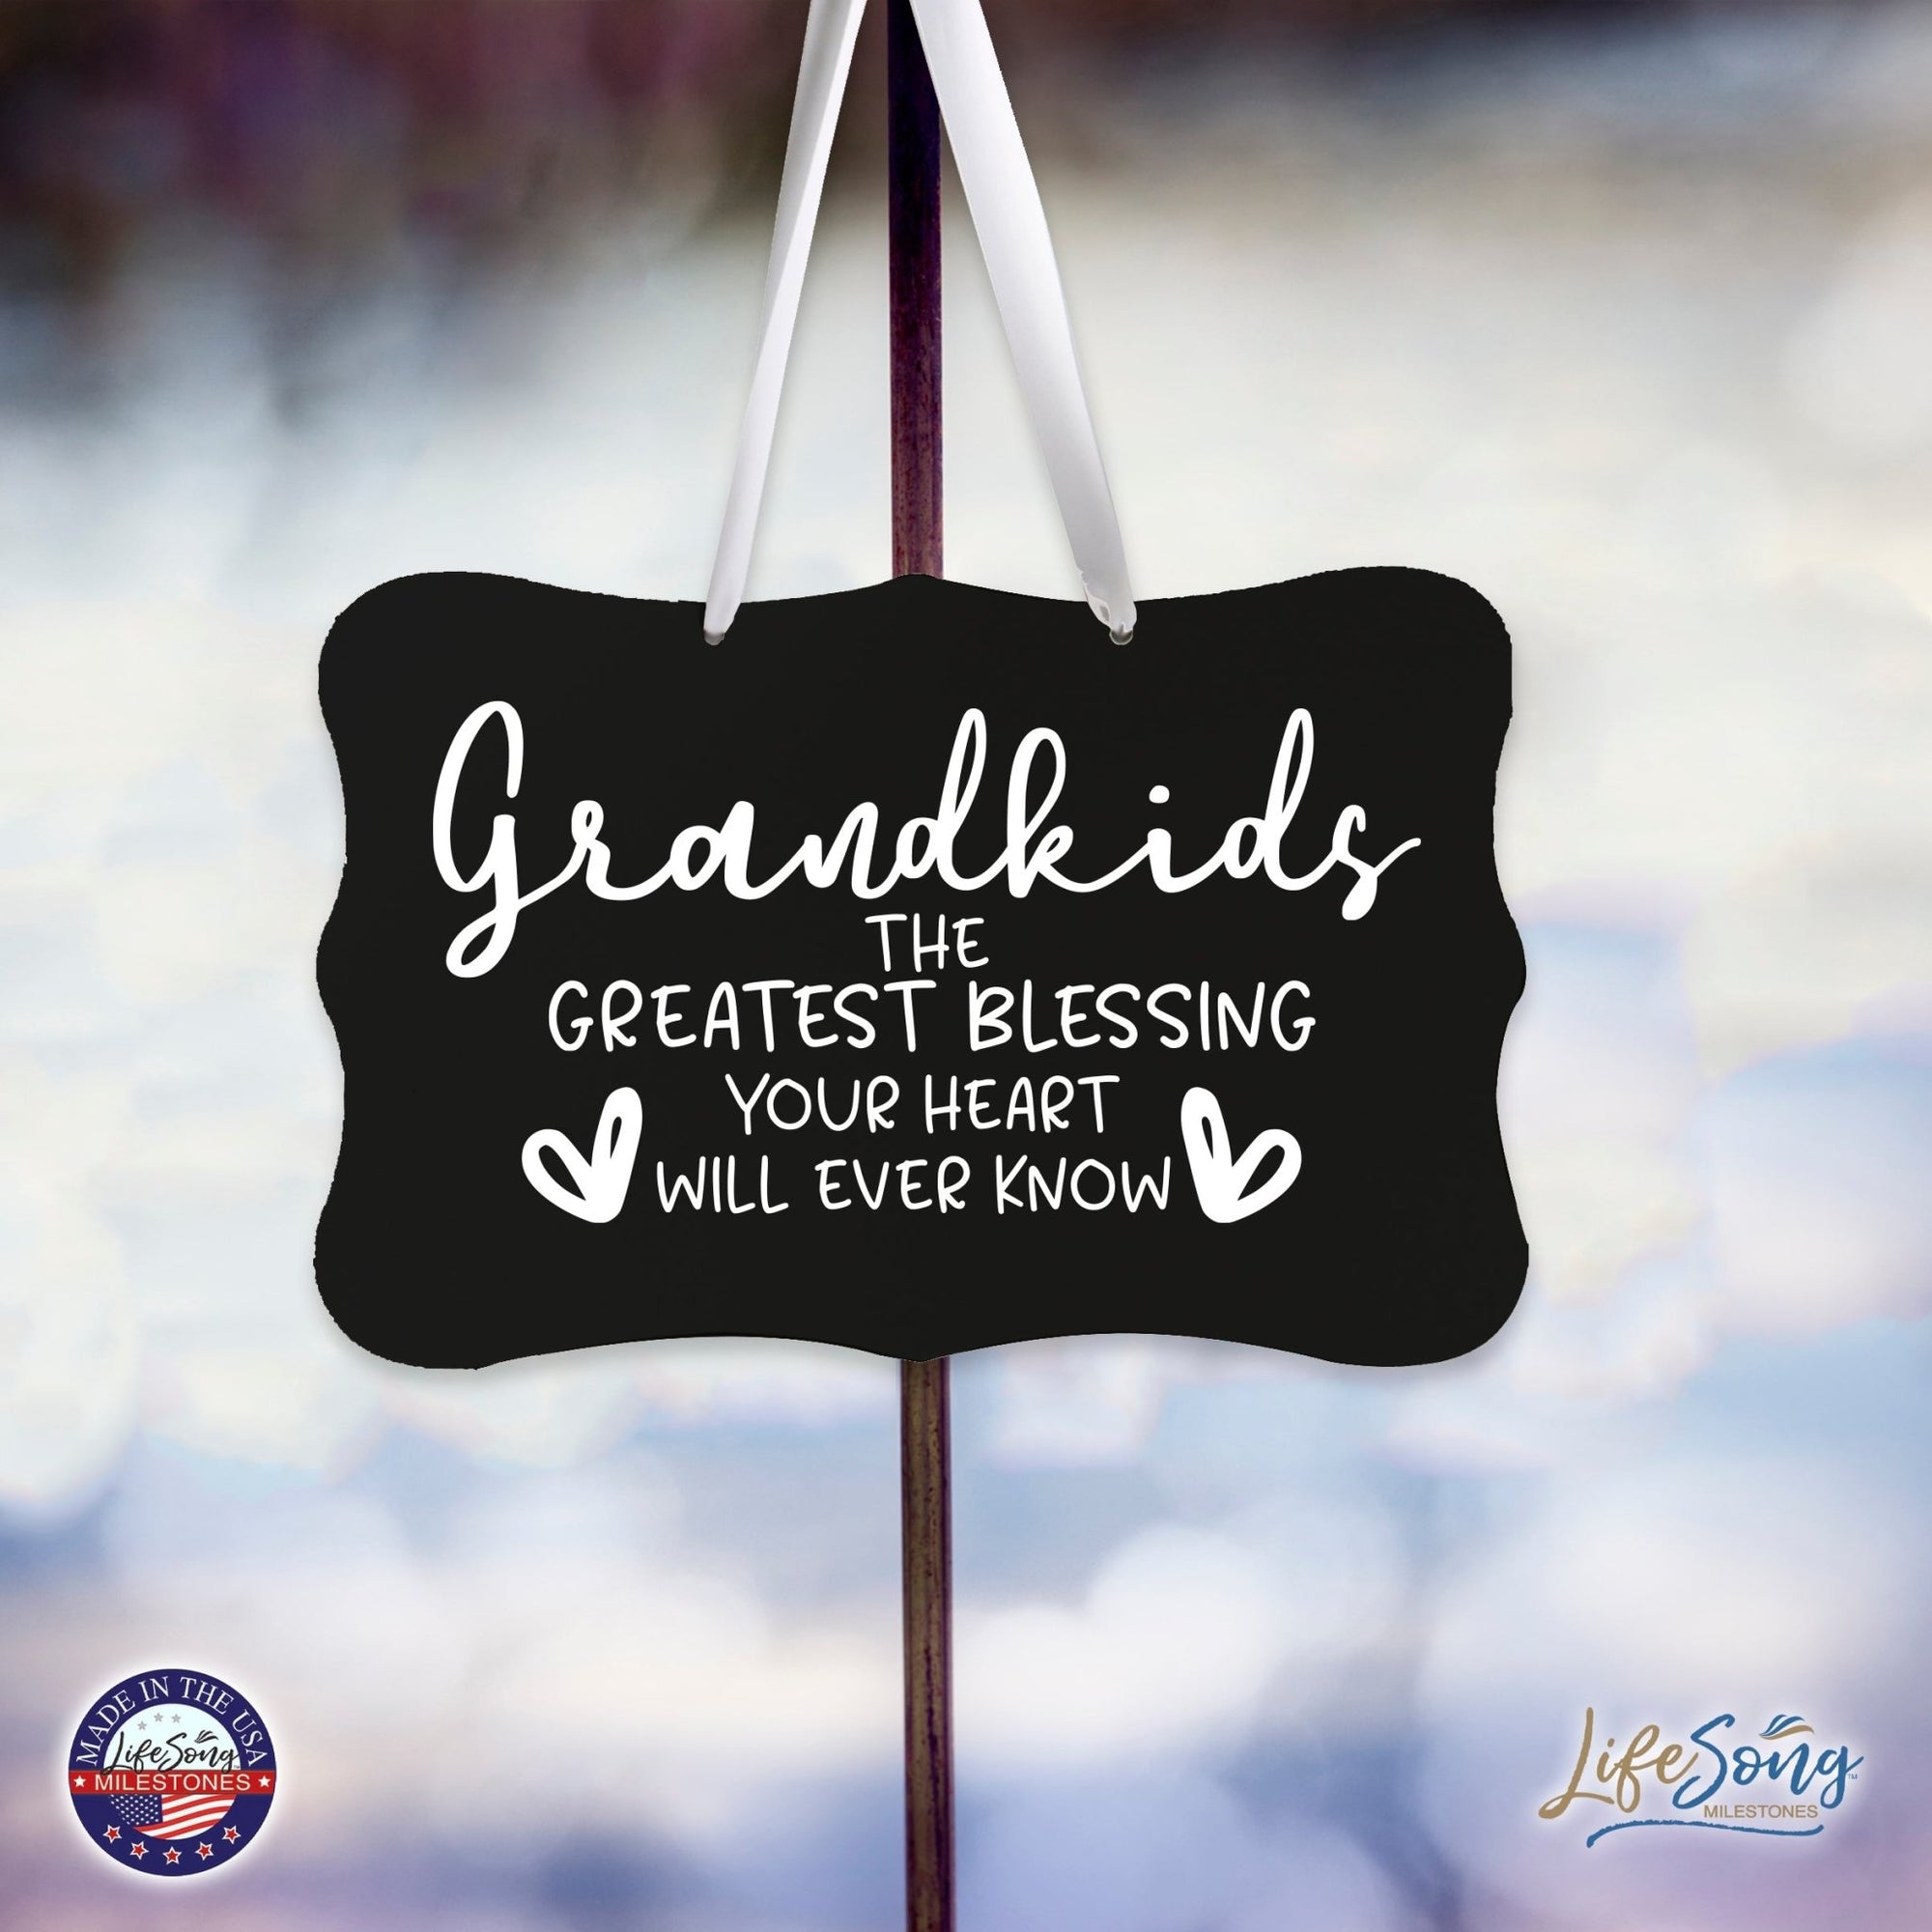 Modern Inspirational Wooden Wall Hanging Sign for Home Decorations 8x12 - The Greatest Blessing - LifeSong Milestones